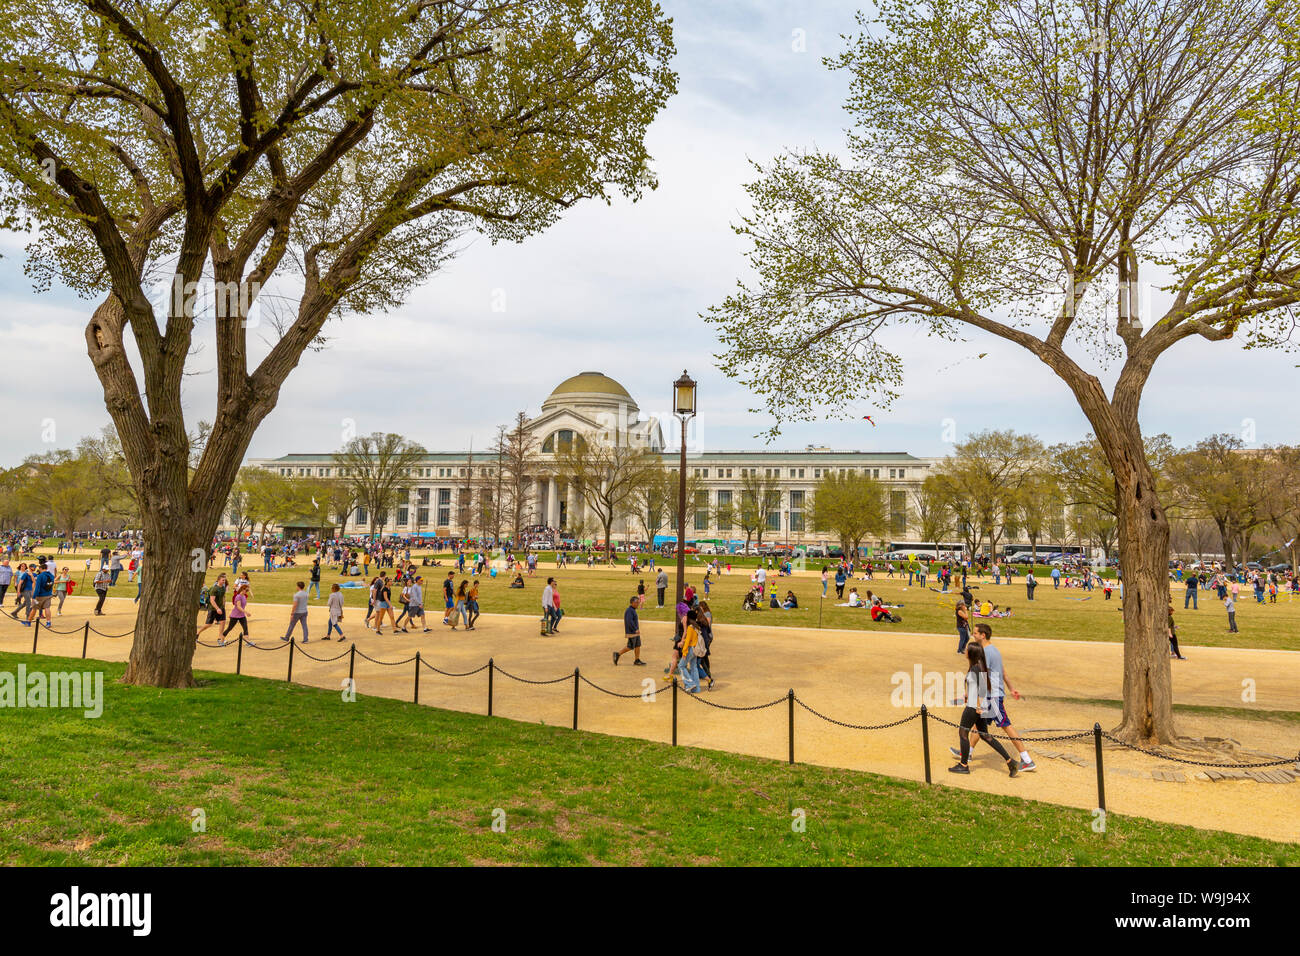 View of Smithsonian National Museum of Natural History in springtime, Washington DC, District of Columbia, United States of America Stock Photo